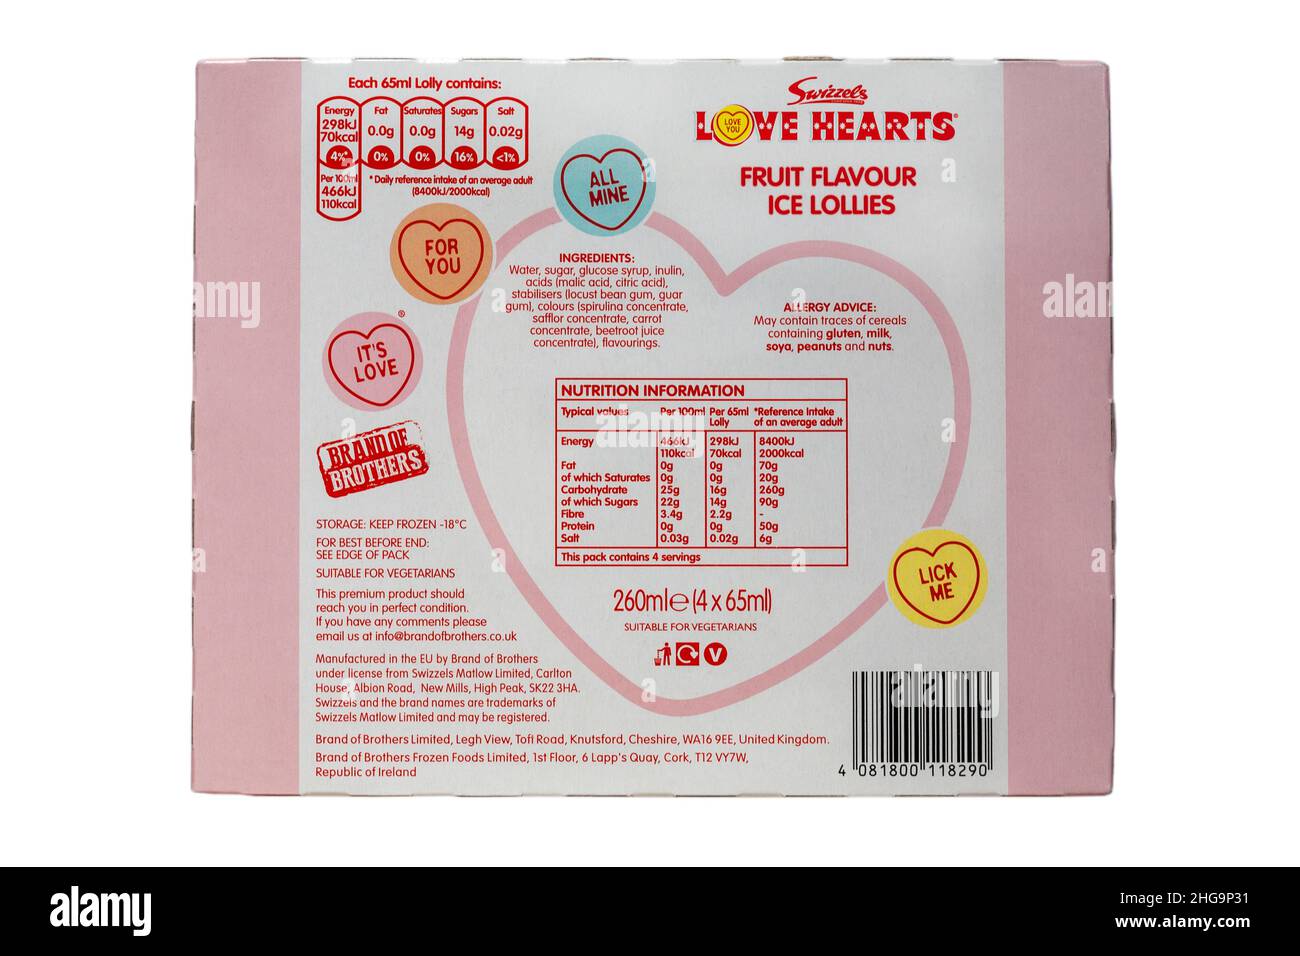 Box of Swizzels Love Hearts fruit flavour ice lollies showing ingredients and nutritional information reference intake labelling information on box Stock Photo